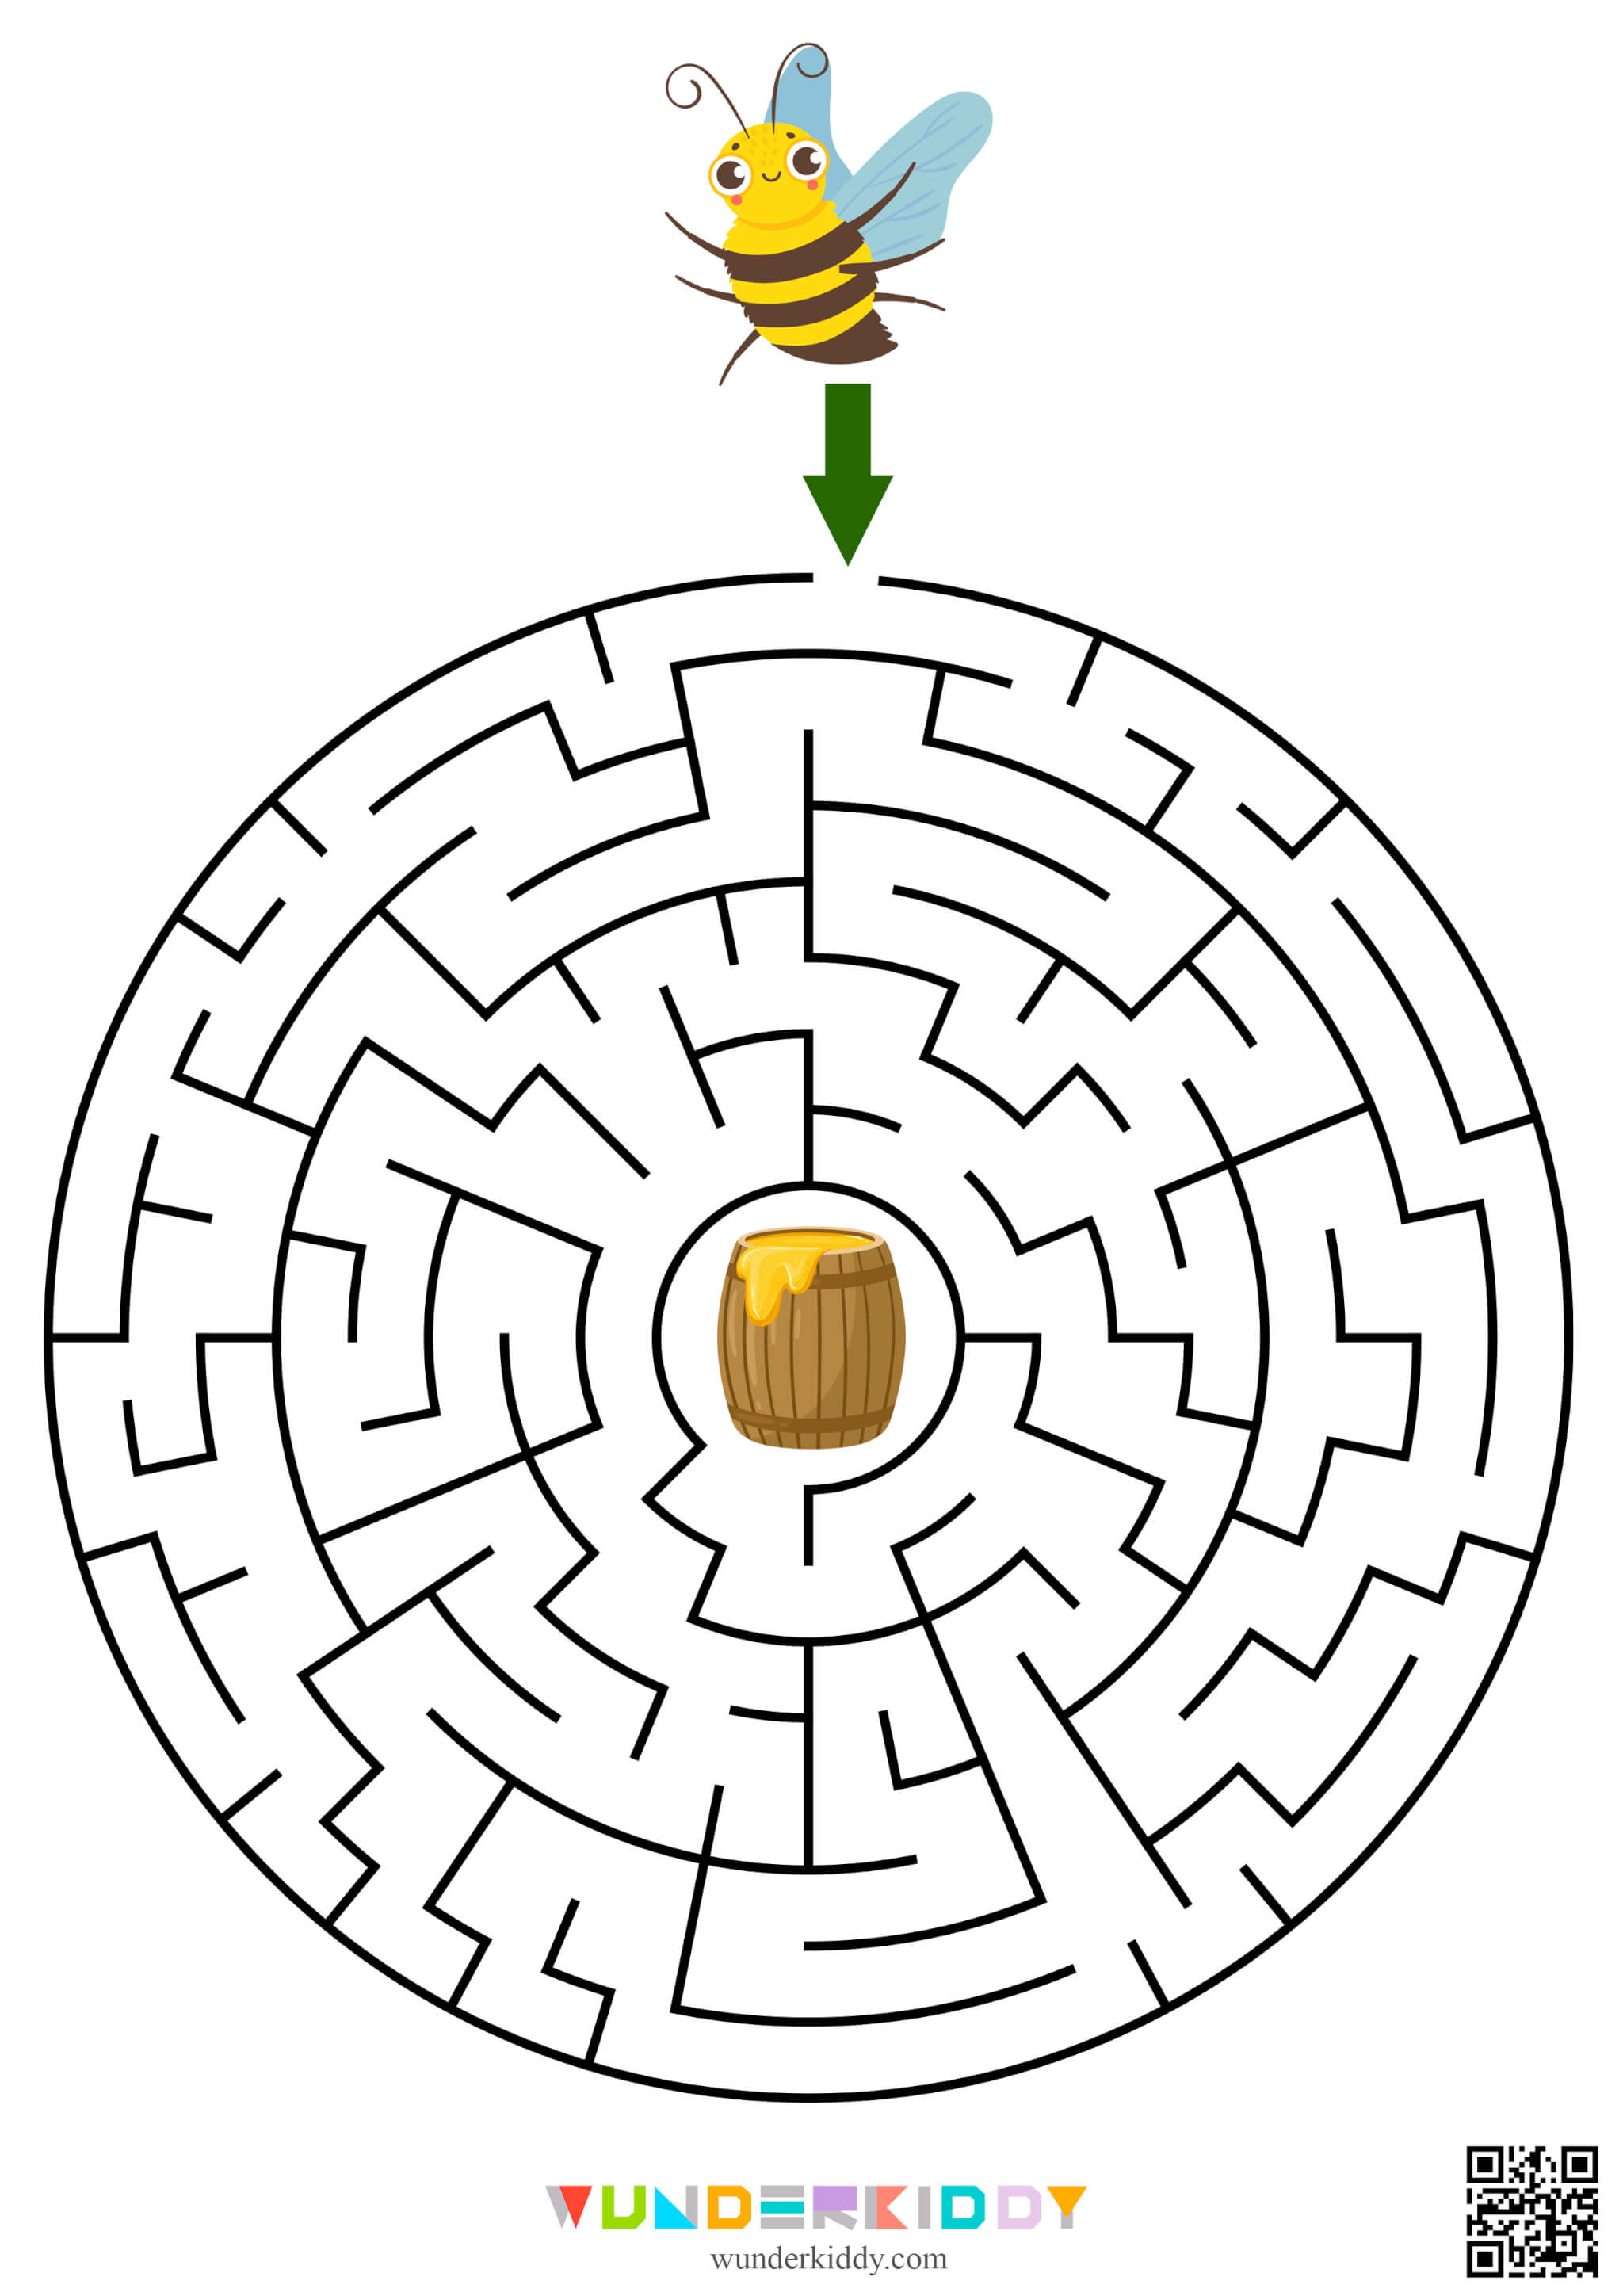 Printable Maze for Kids Help to Find the Way - Image 3